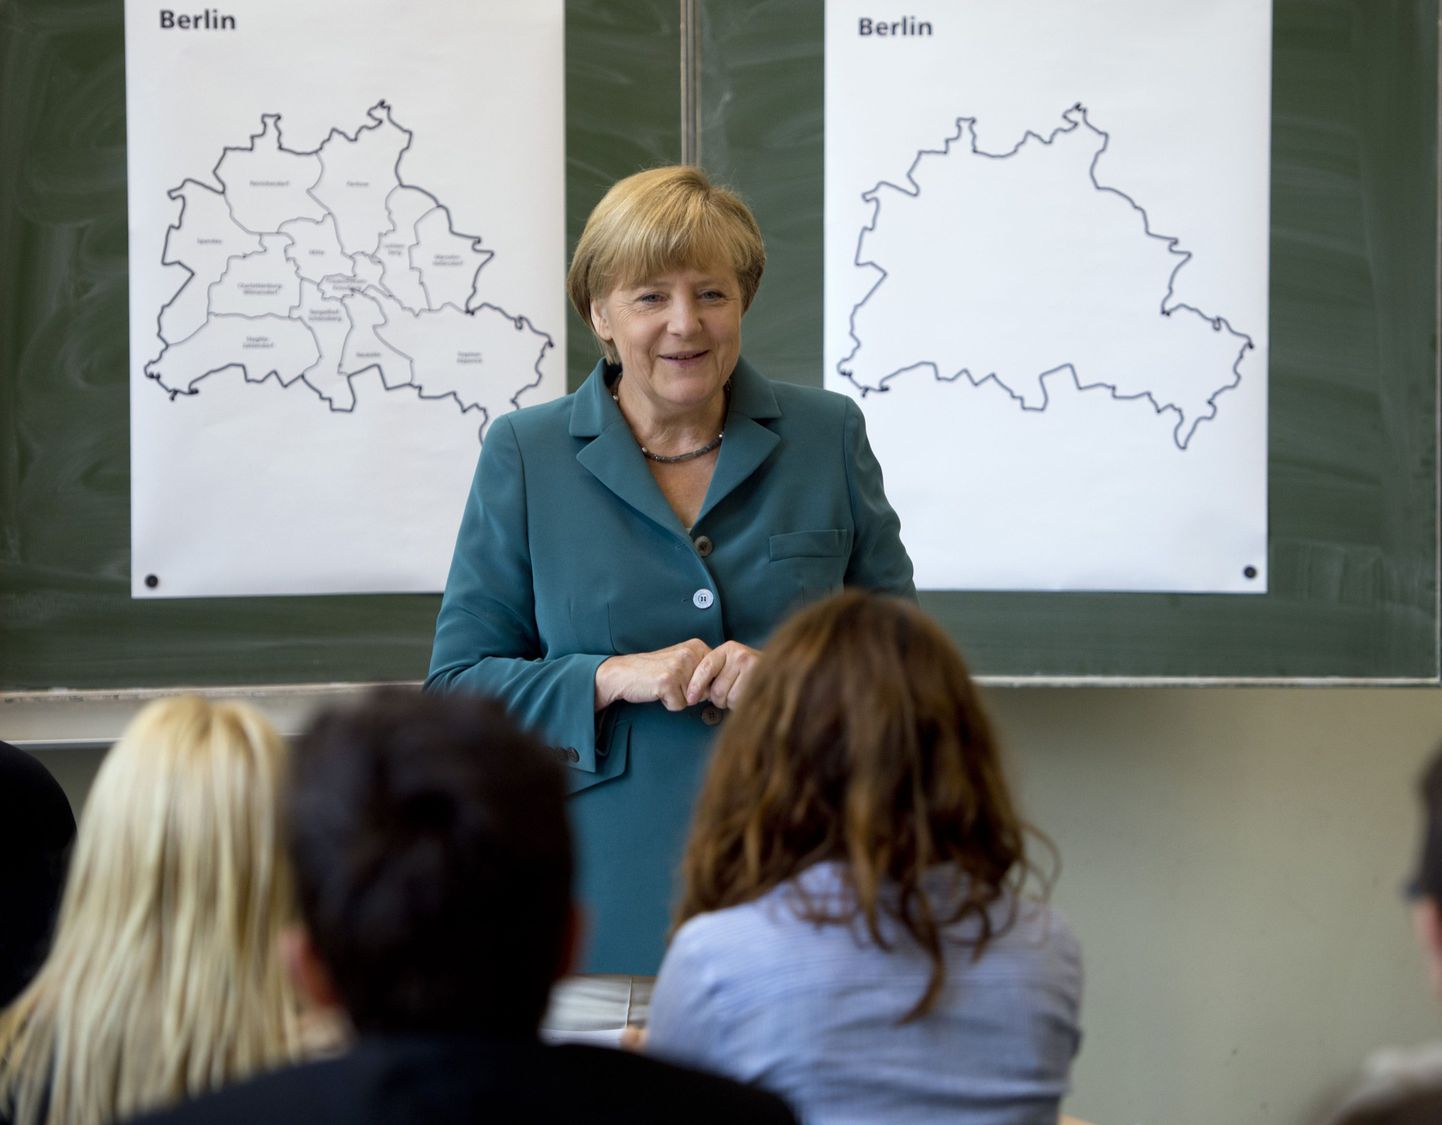 German Chancellor Angela Merkel  smiles as she lectures on the building of the Berlin Wall   Aug. 13, 1961 to a 12th grade class during her visit to the Heinrich Schliemann Gymnasium, secondary school in Berlin, Germany on  Tuesday Aug. 13, 2013.  (AP Photo/Odd Andersen,Pool) / SCANPIX Code: 436